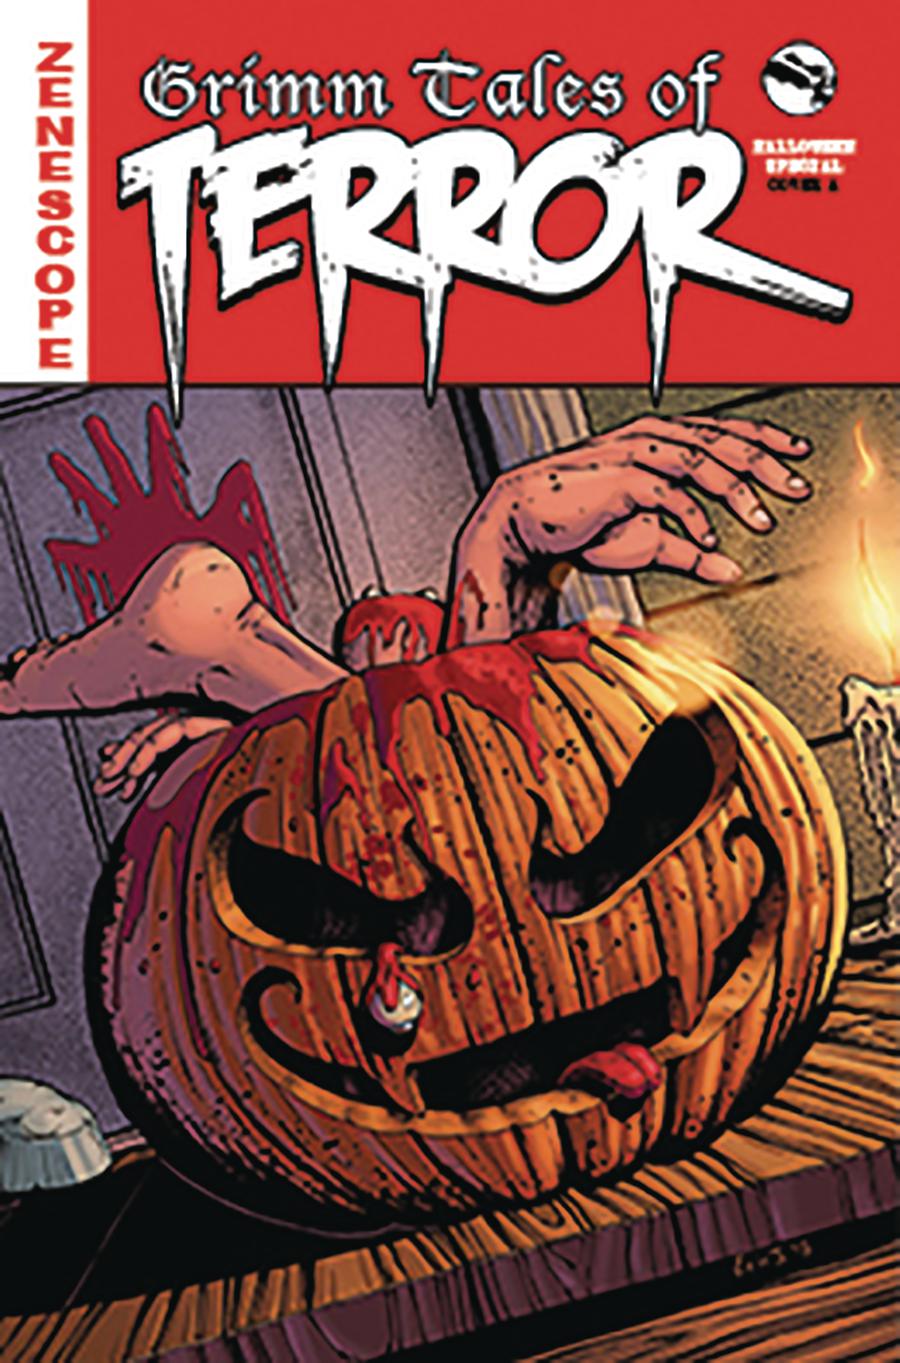 Grimm Fairy Tales Presents Grimm Tales Of Terror 2018 Halloween Edition #1 Cover A Eric J